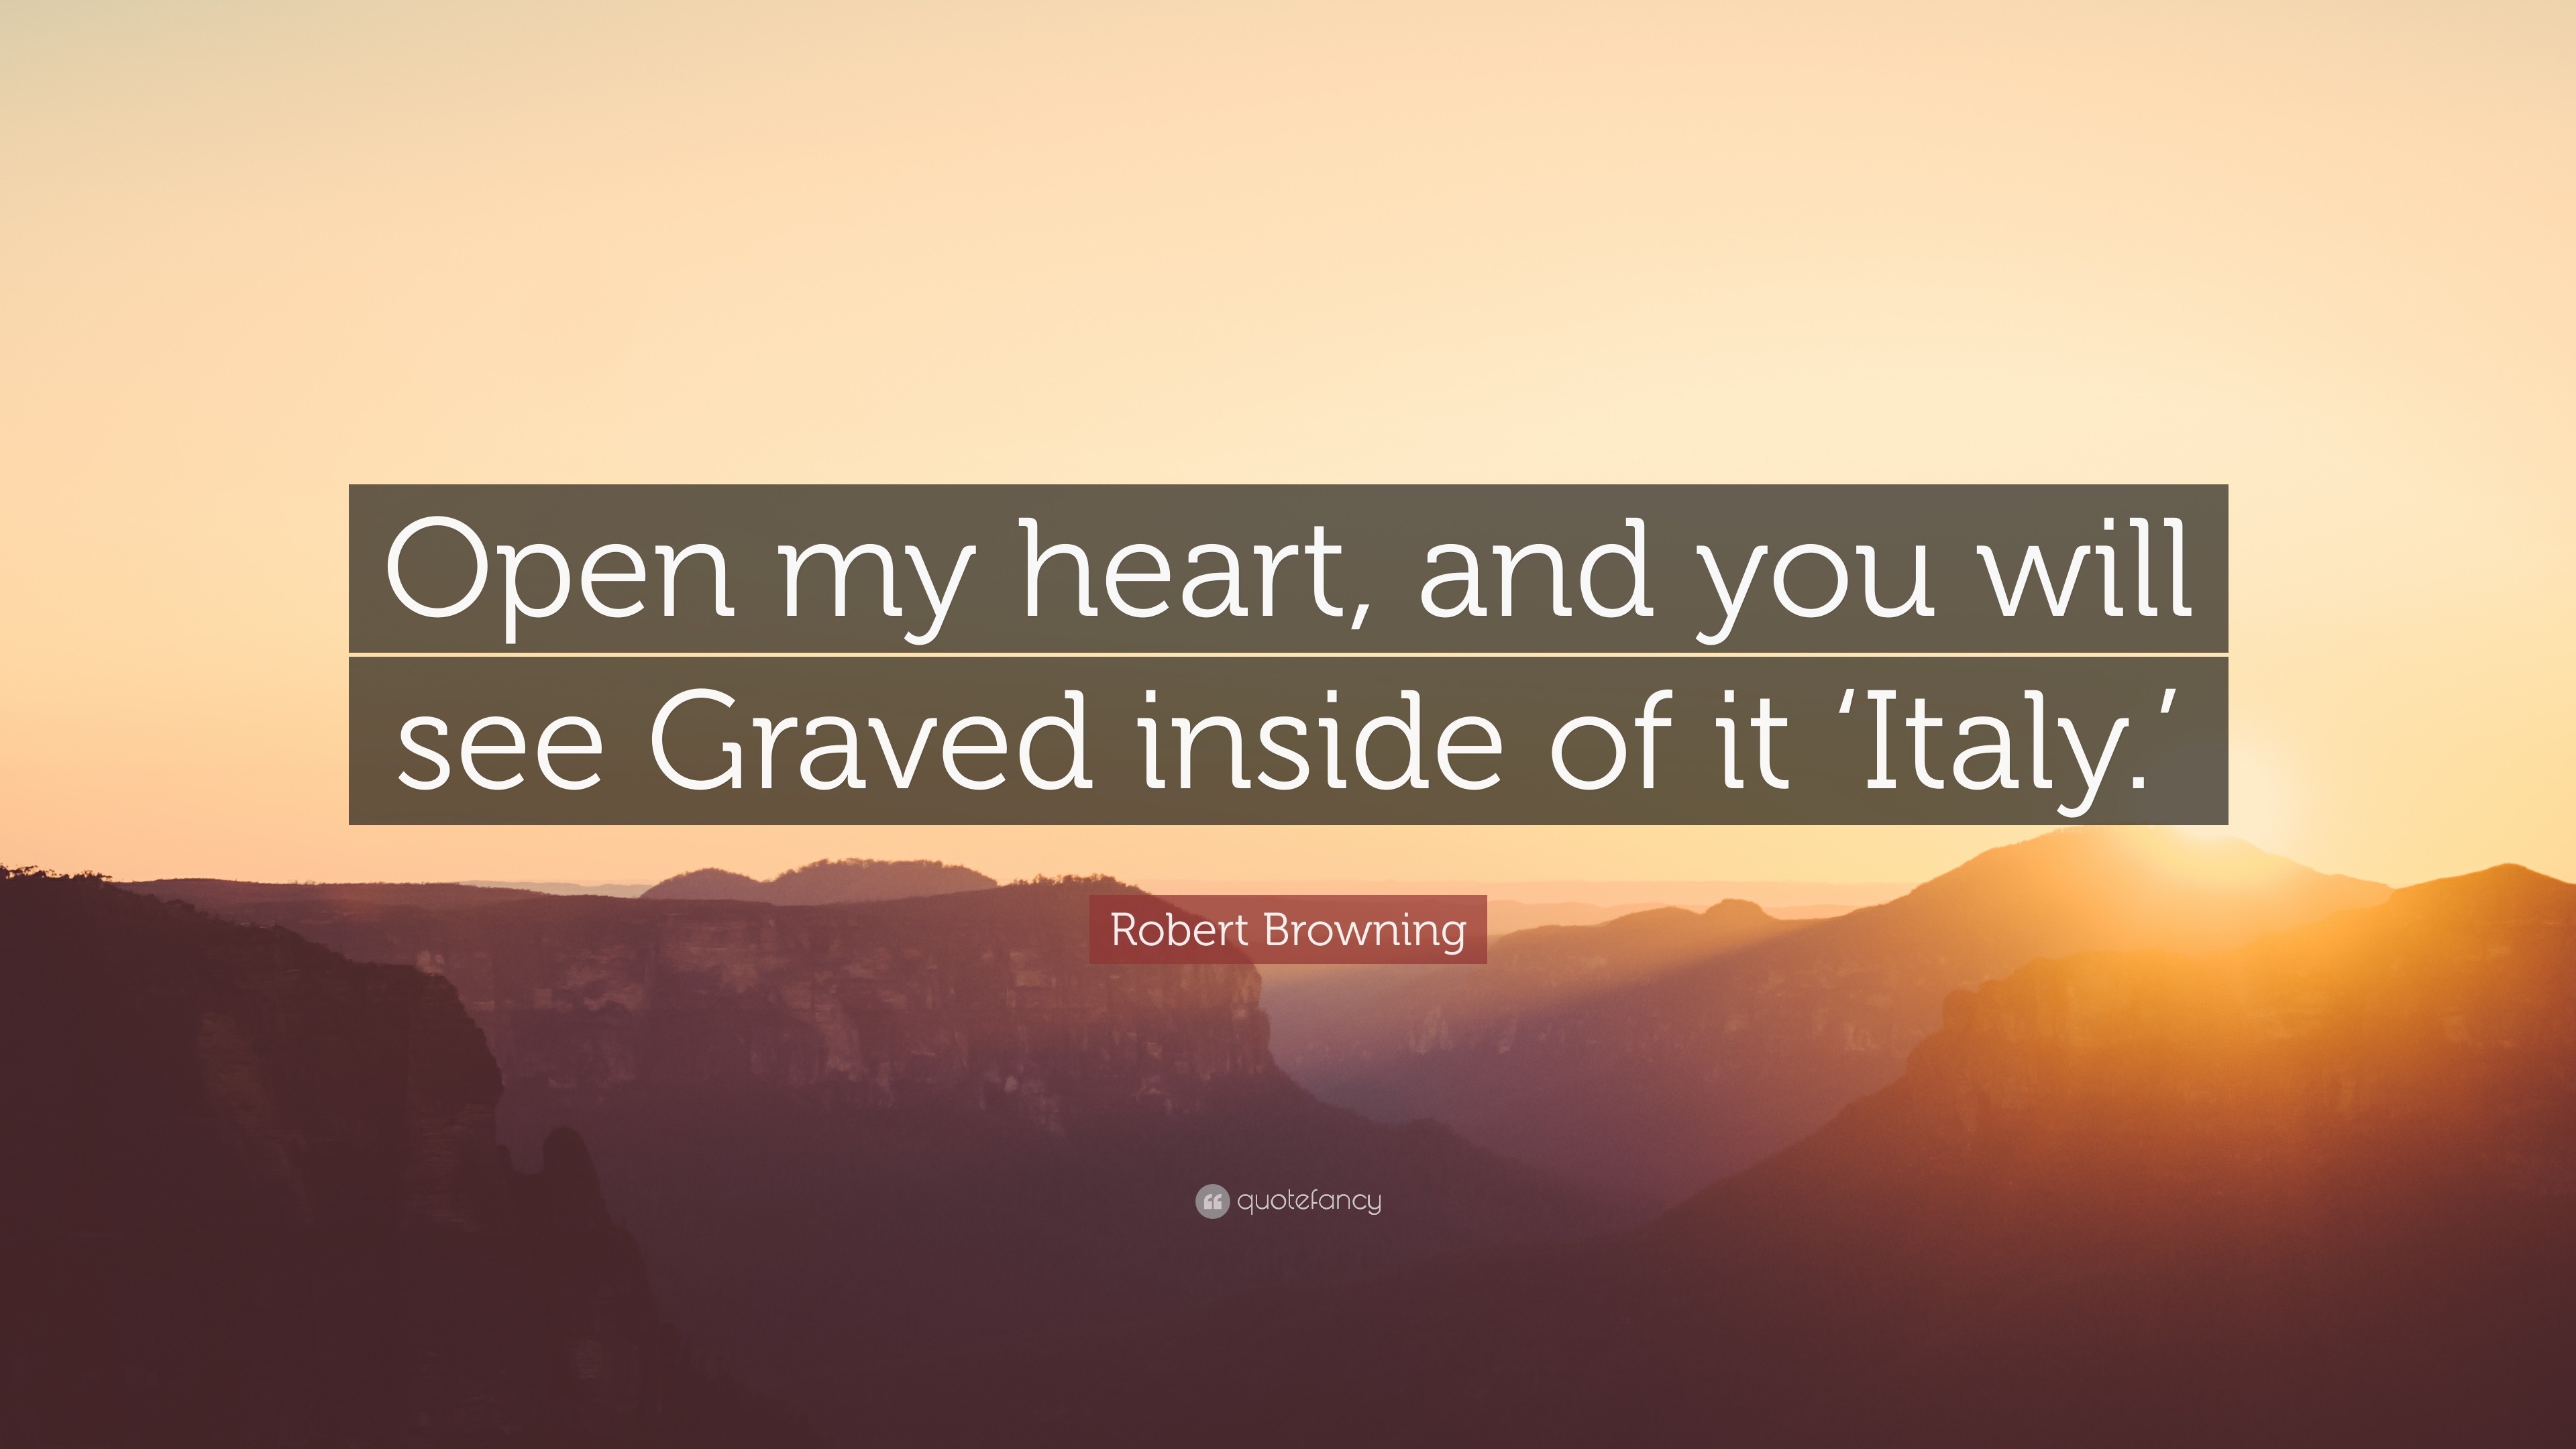 Italian Quotes: A Glimpse Into the Heart of Italy